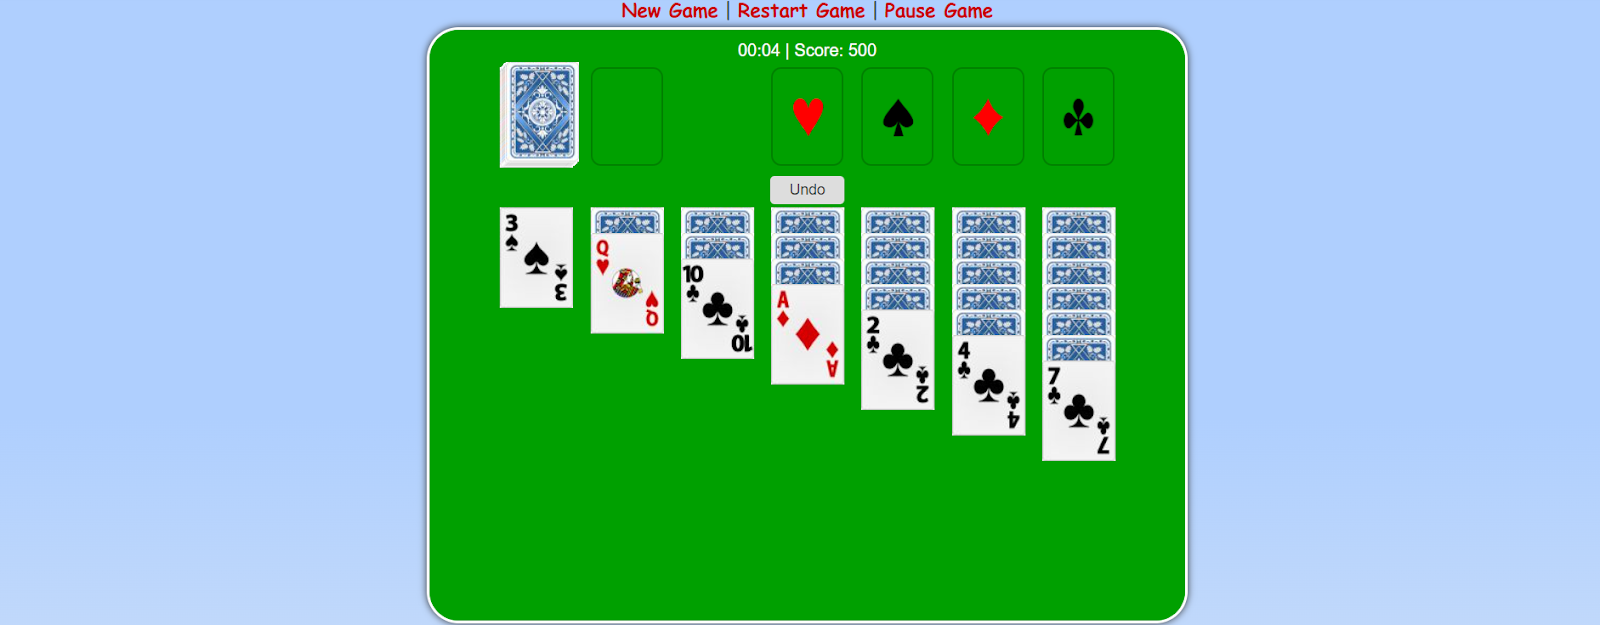 play game solitr